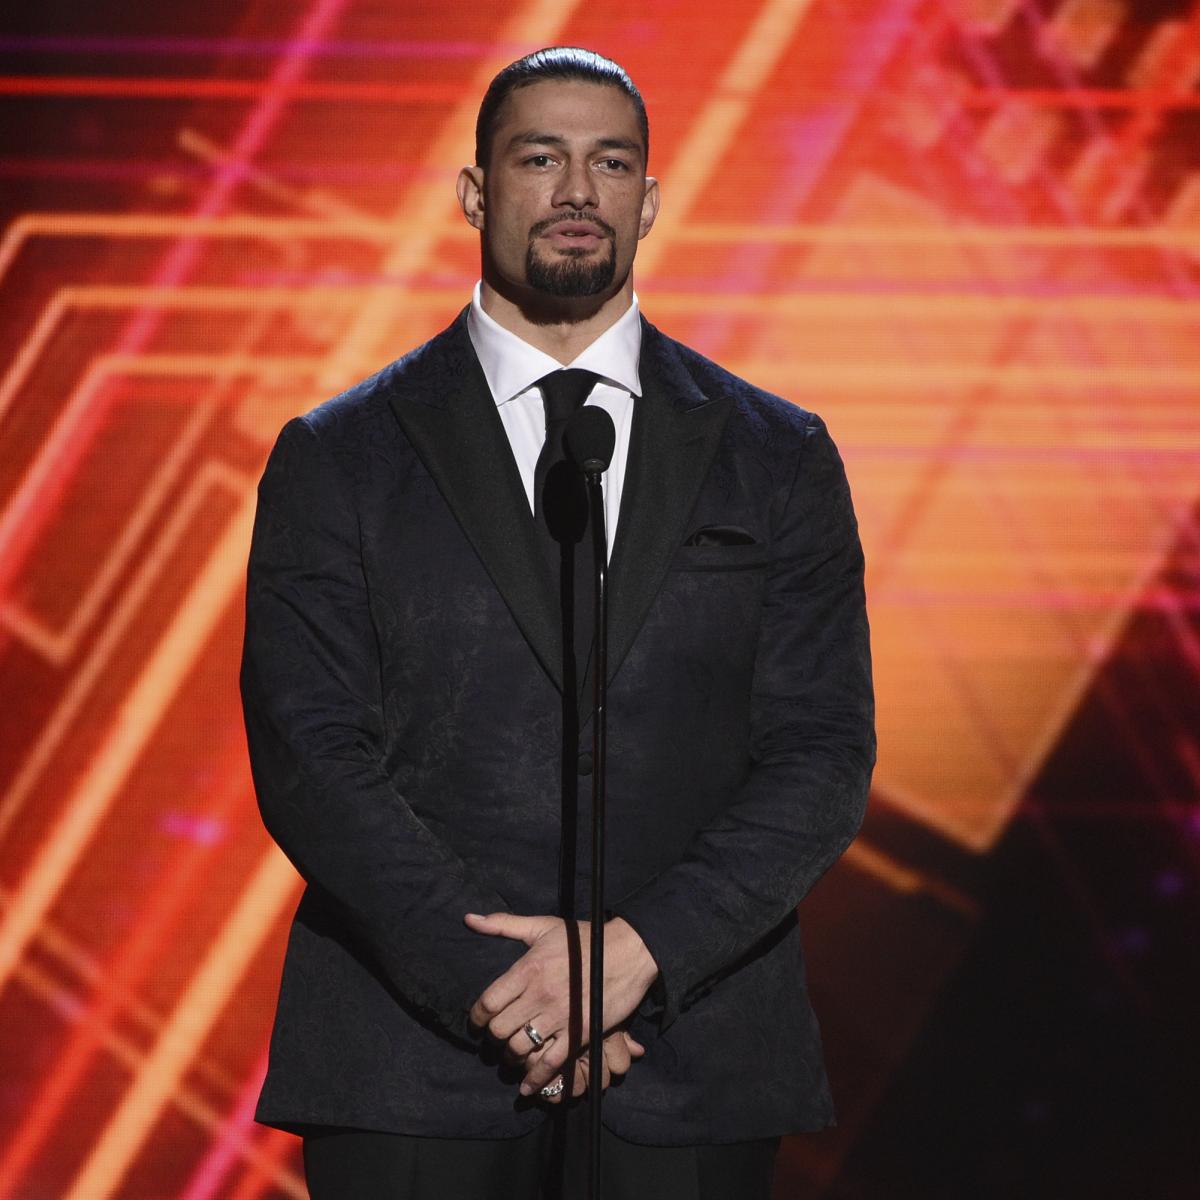 Roman Reigns Responds to the Undertaker Asserting Today’s WWE Stars Are ‘Soft’